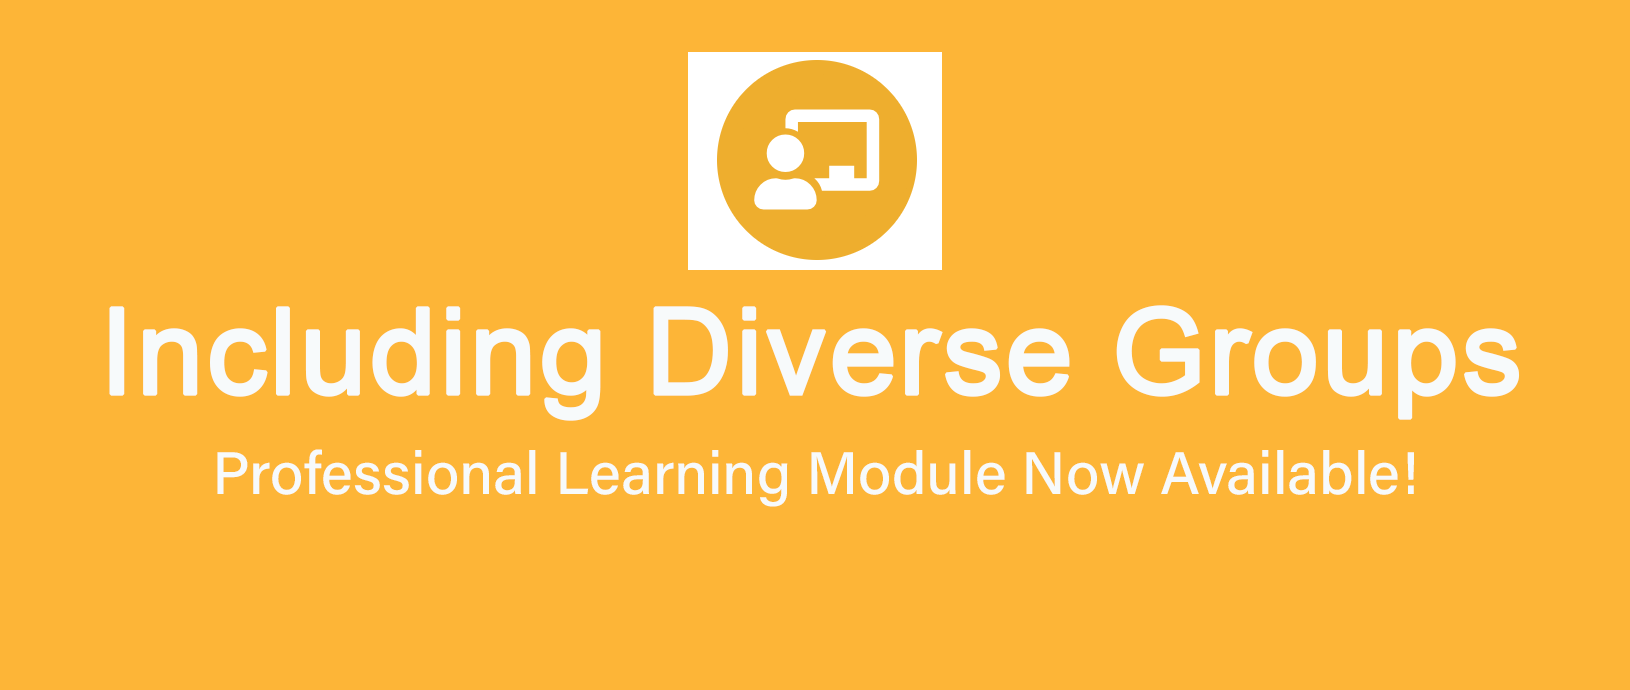 Including Diverse Groups Professional Learning Module Now Available